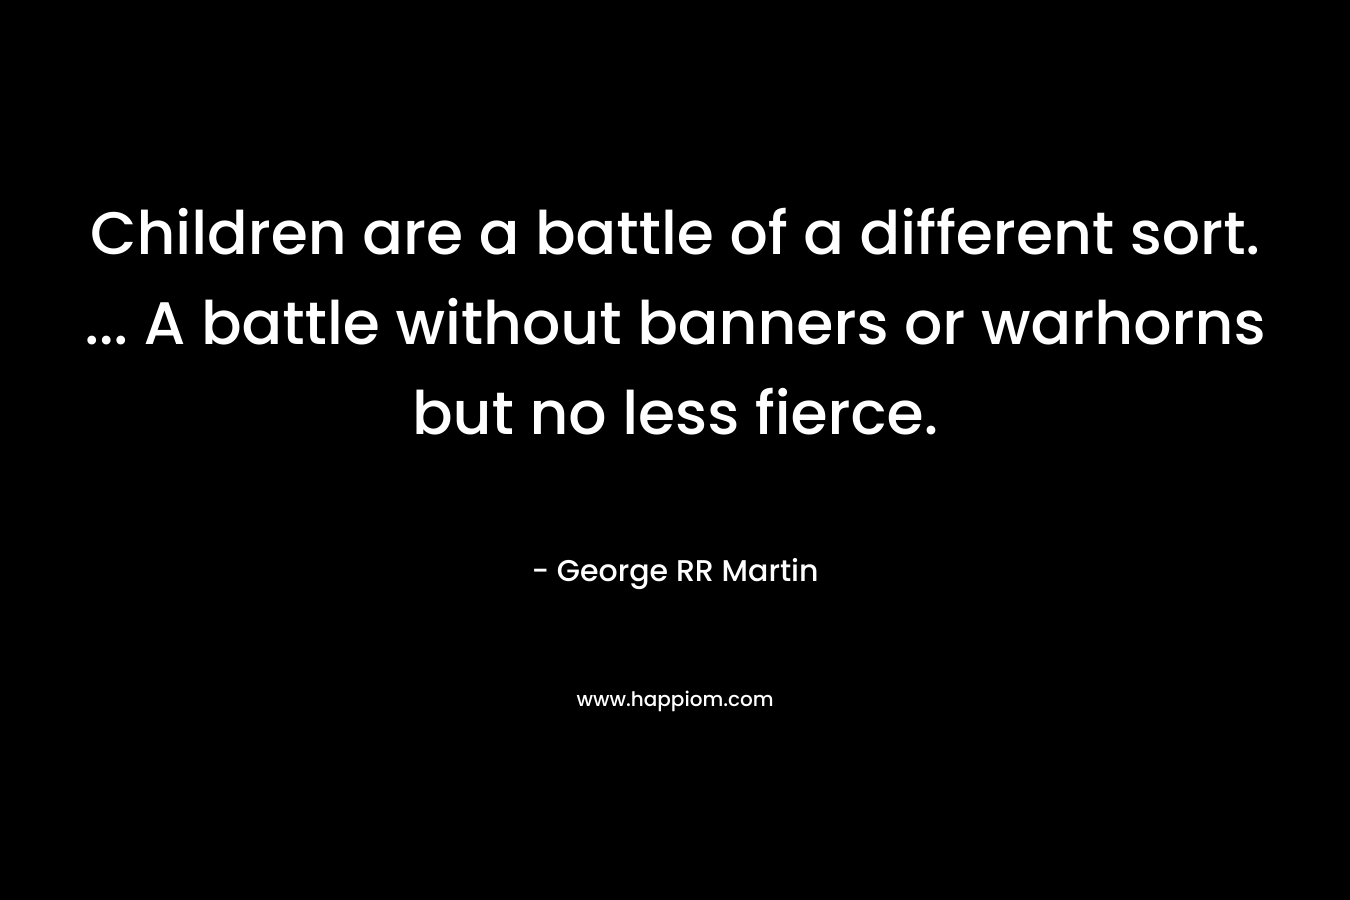 Children are a battle of a different sort. ... A battle without banners or warhorns but no less fierce.